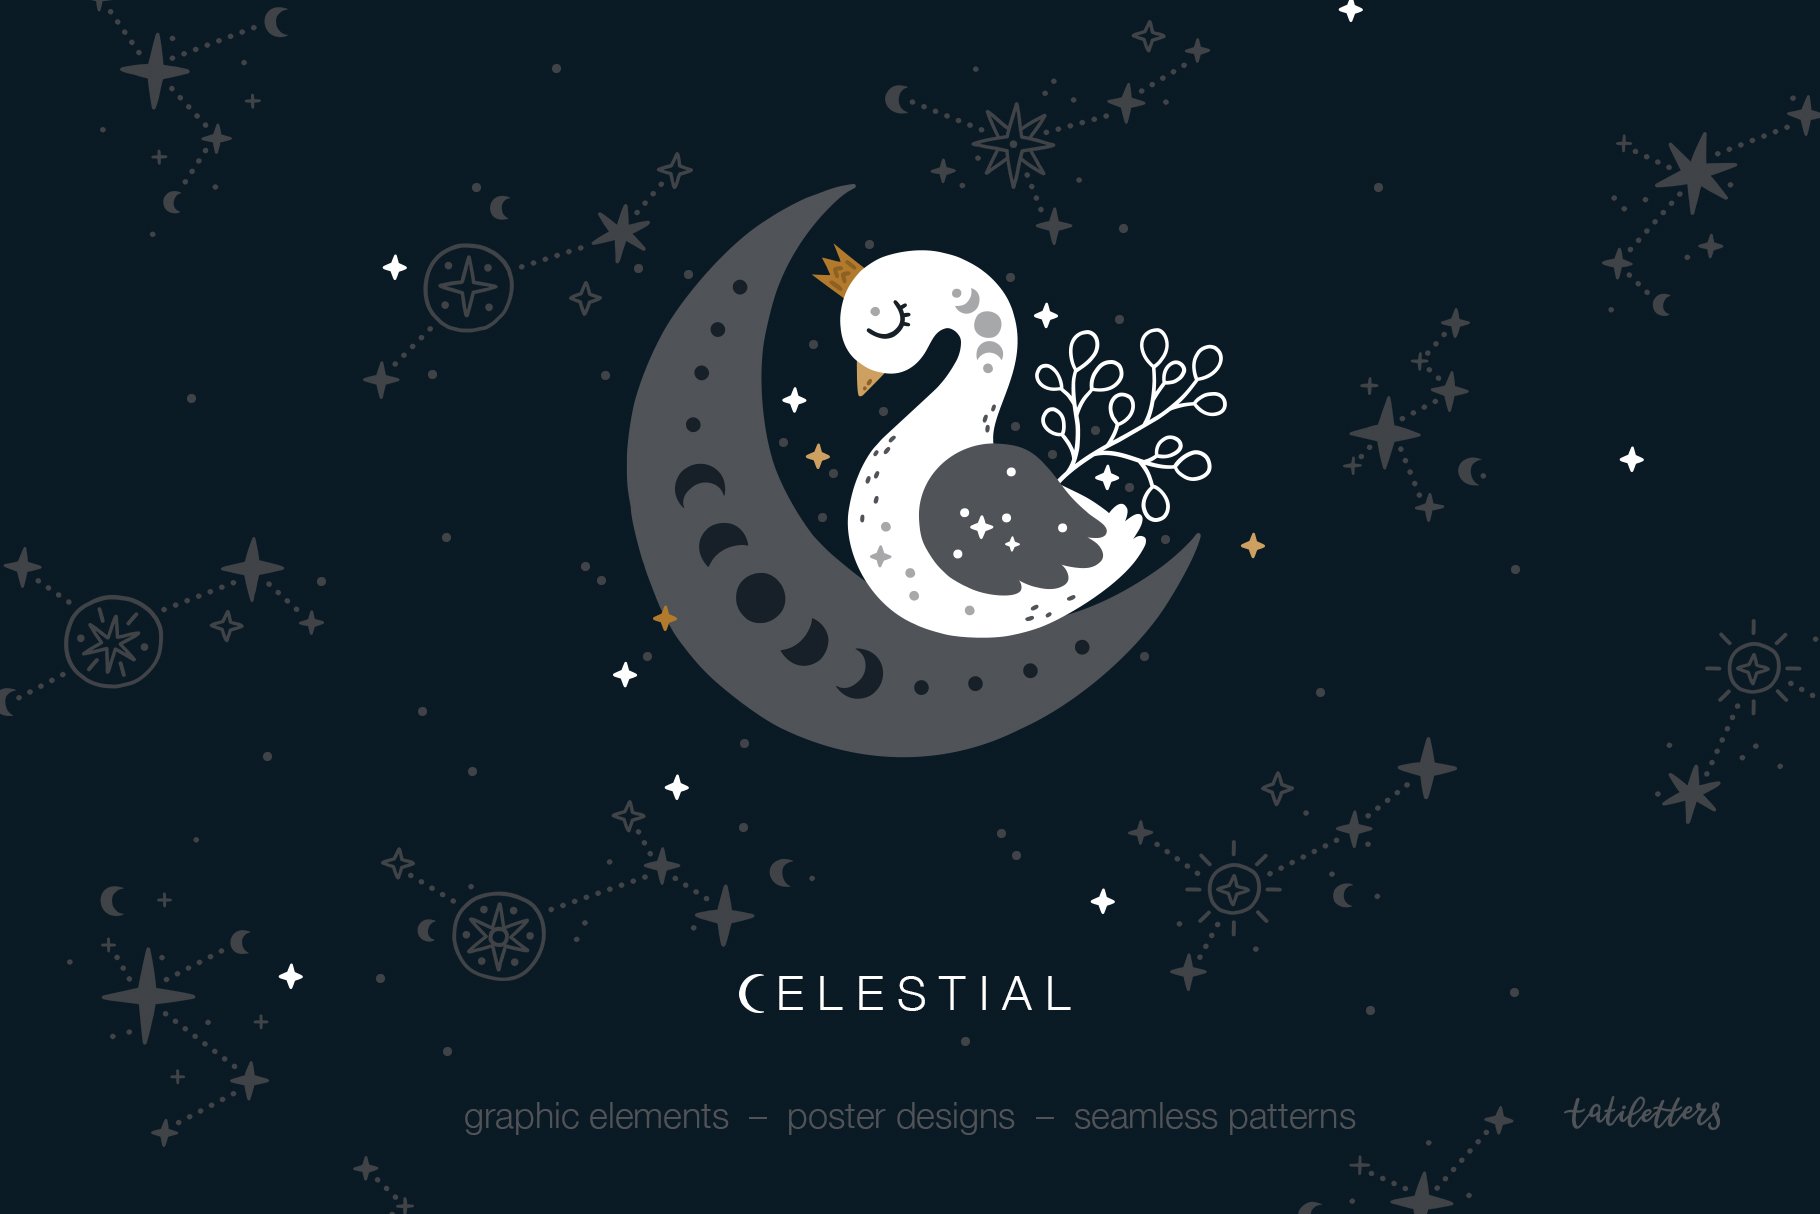 Celestial – stars and moon cover image.